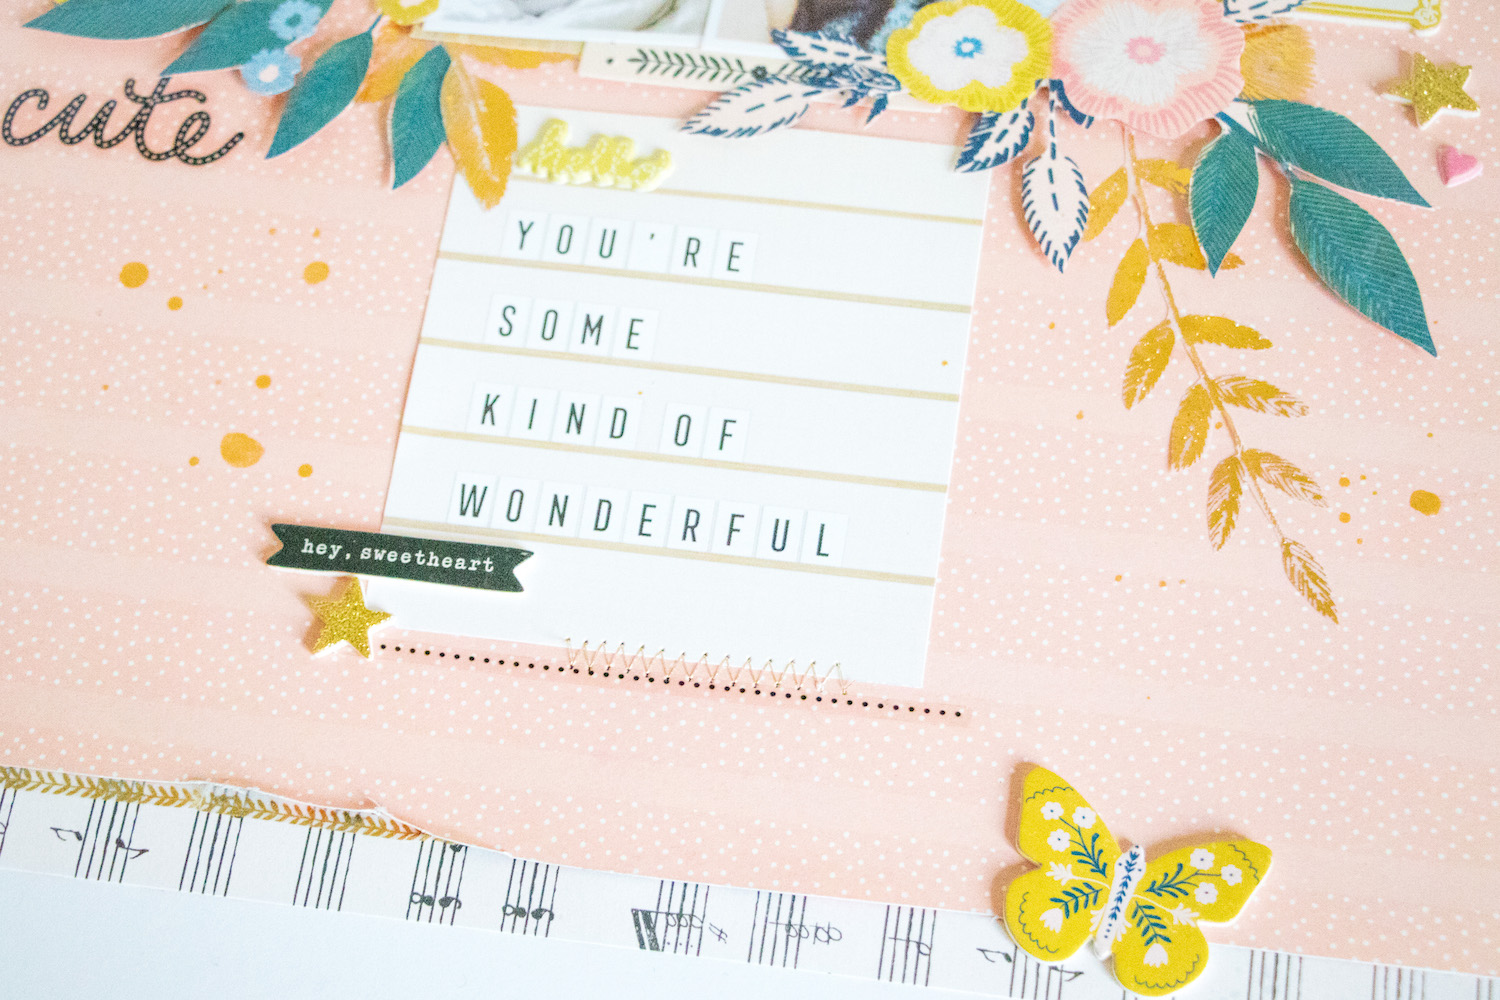 Some Kind of Wonderful by ScatteredConfetti. // #scrapooking #cratepaper #maggieholmes